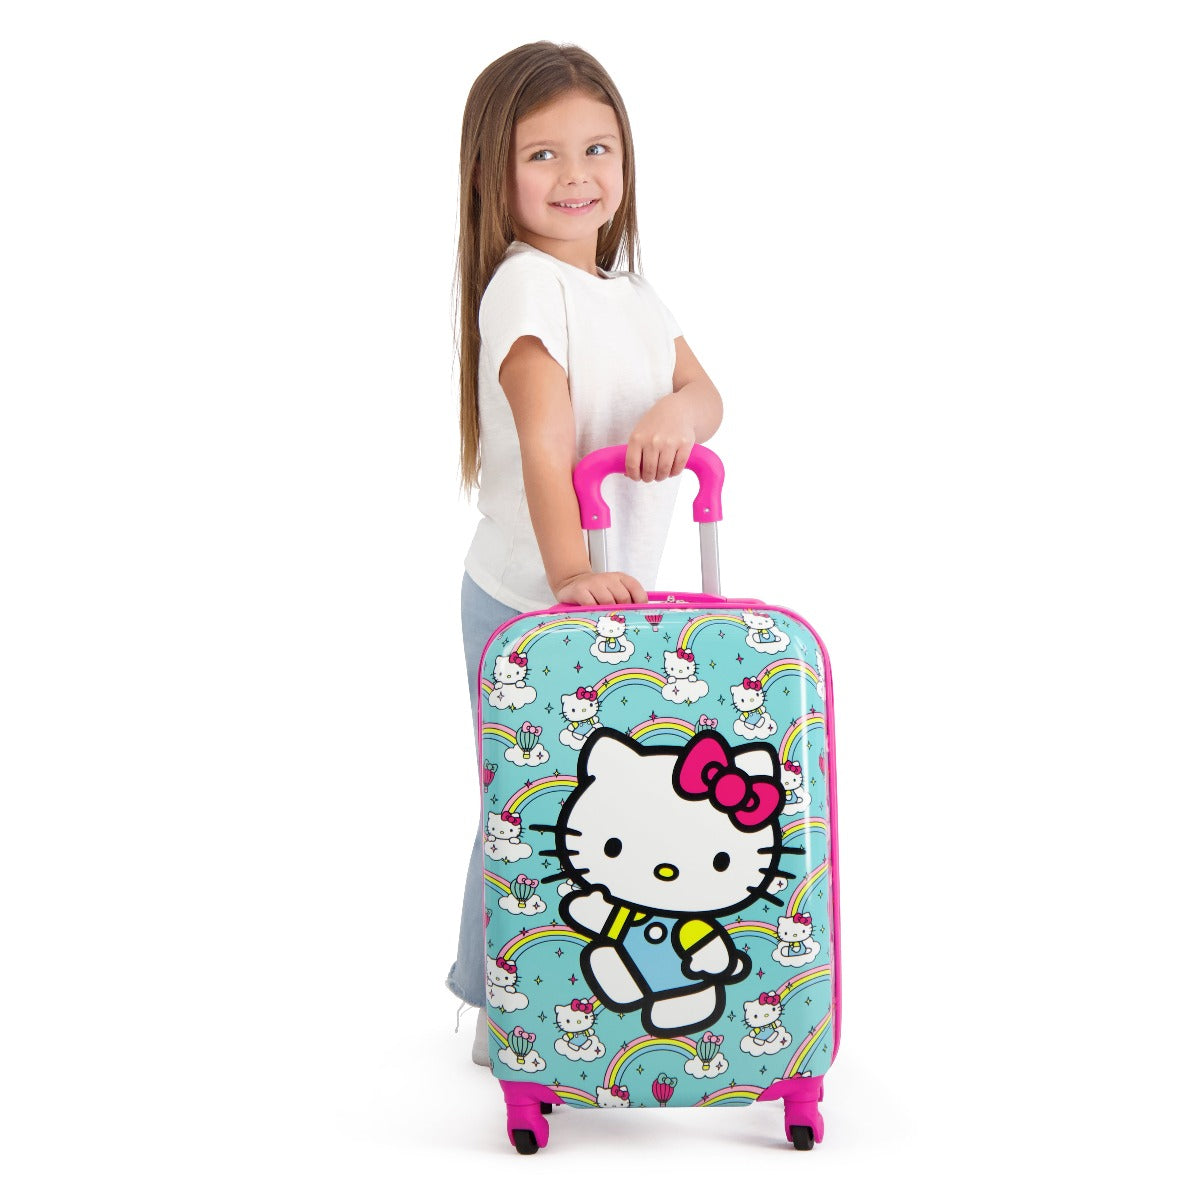 Kids Hello Kitty Ful Rainbows 21" carry-on rolling luggage spinner suitcase